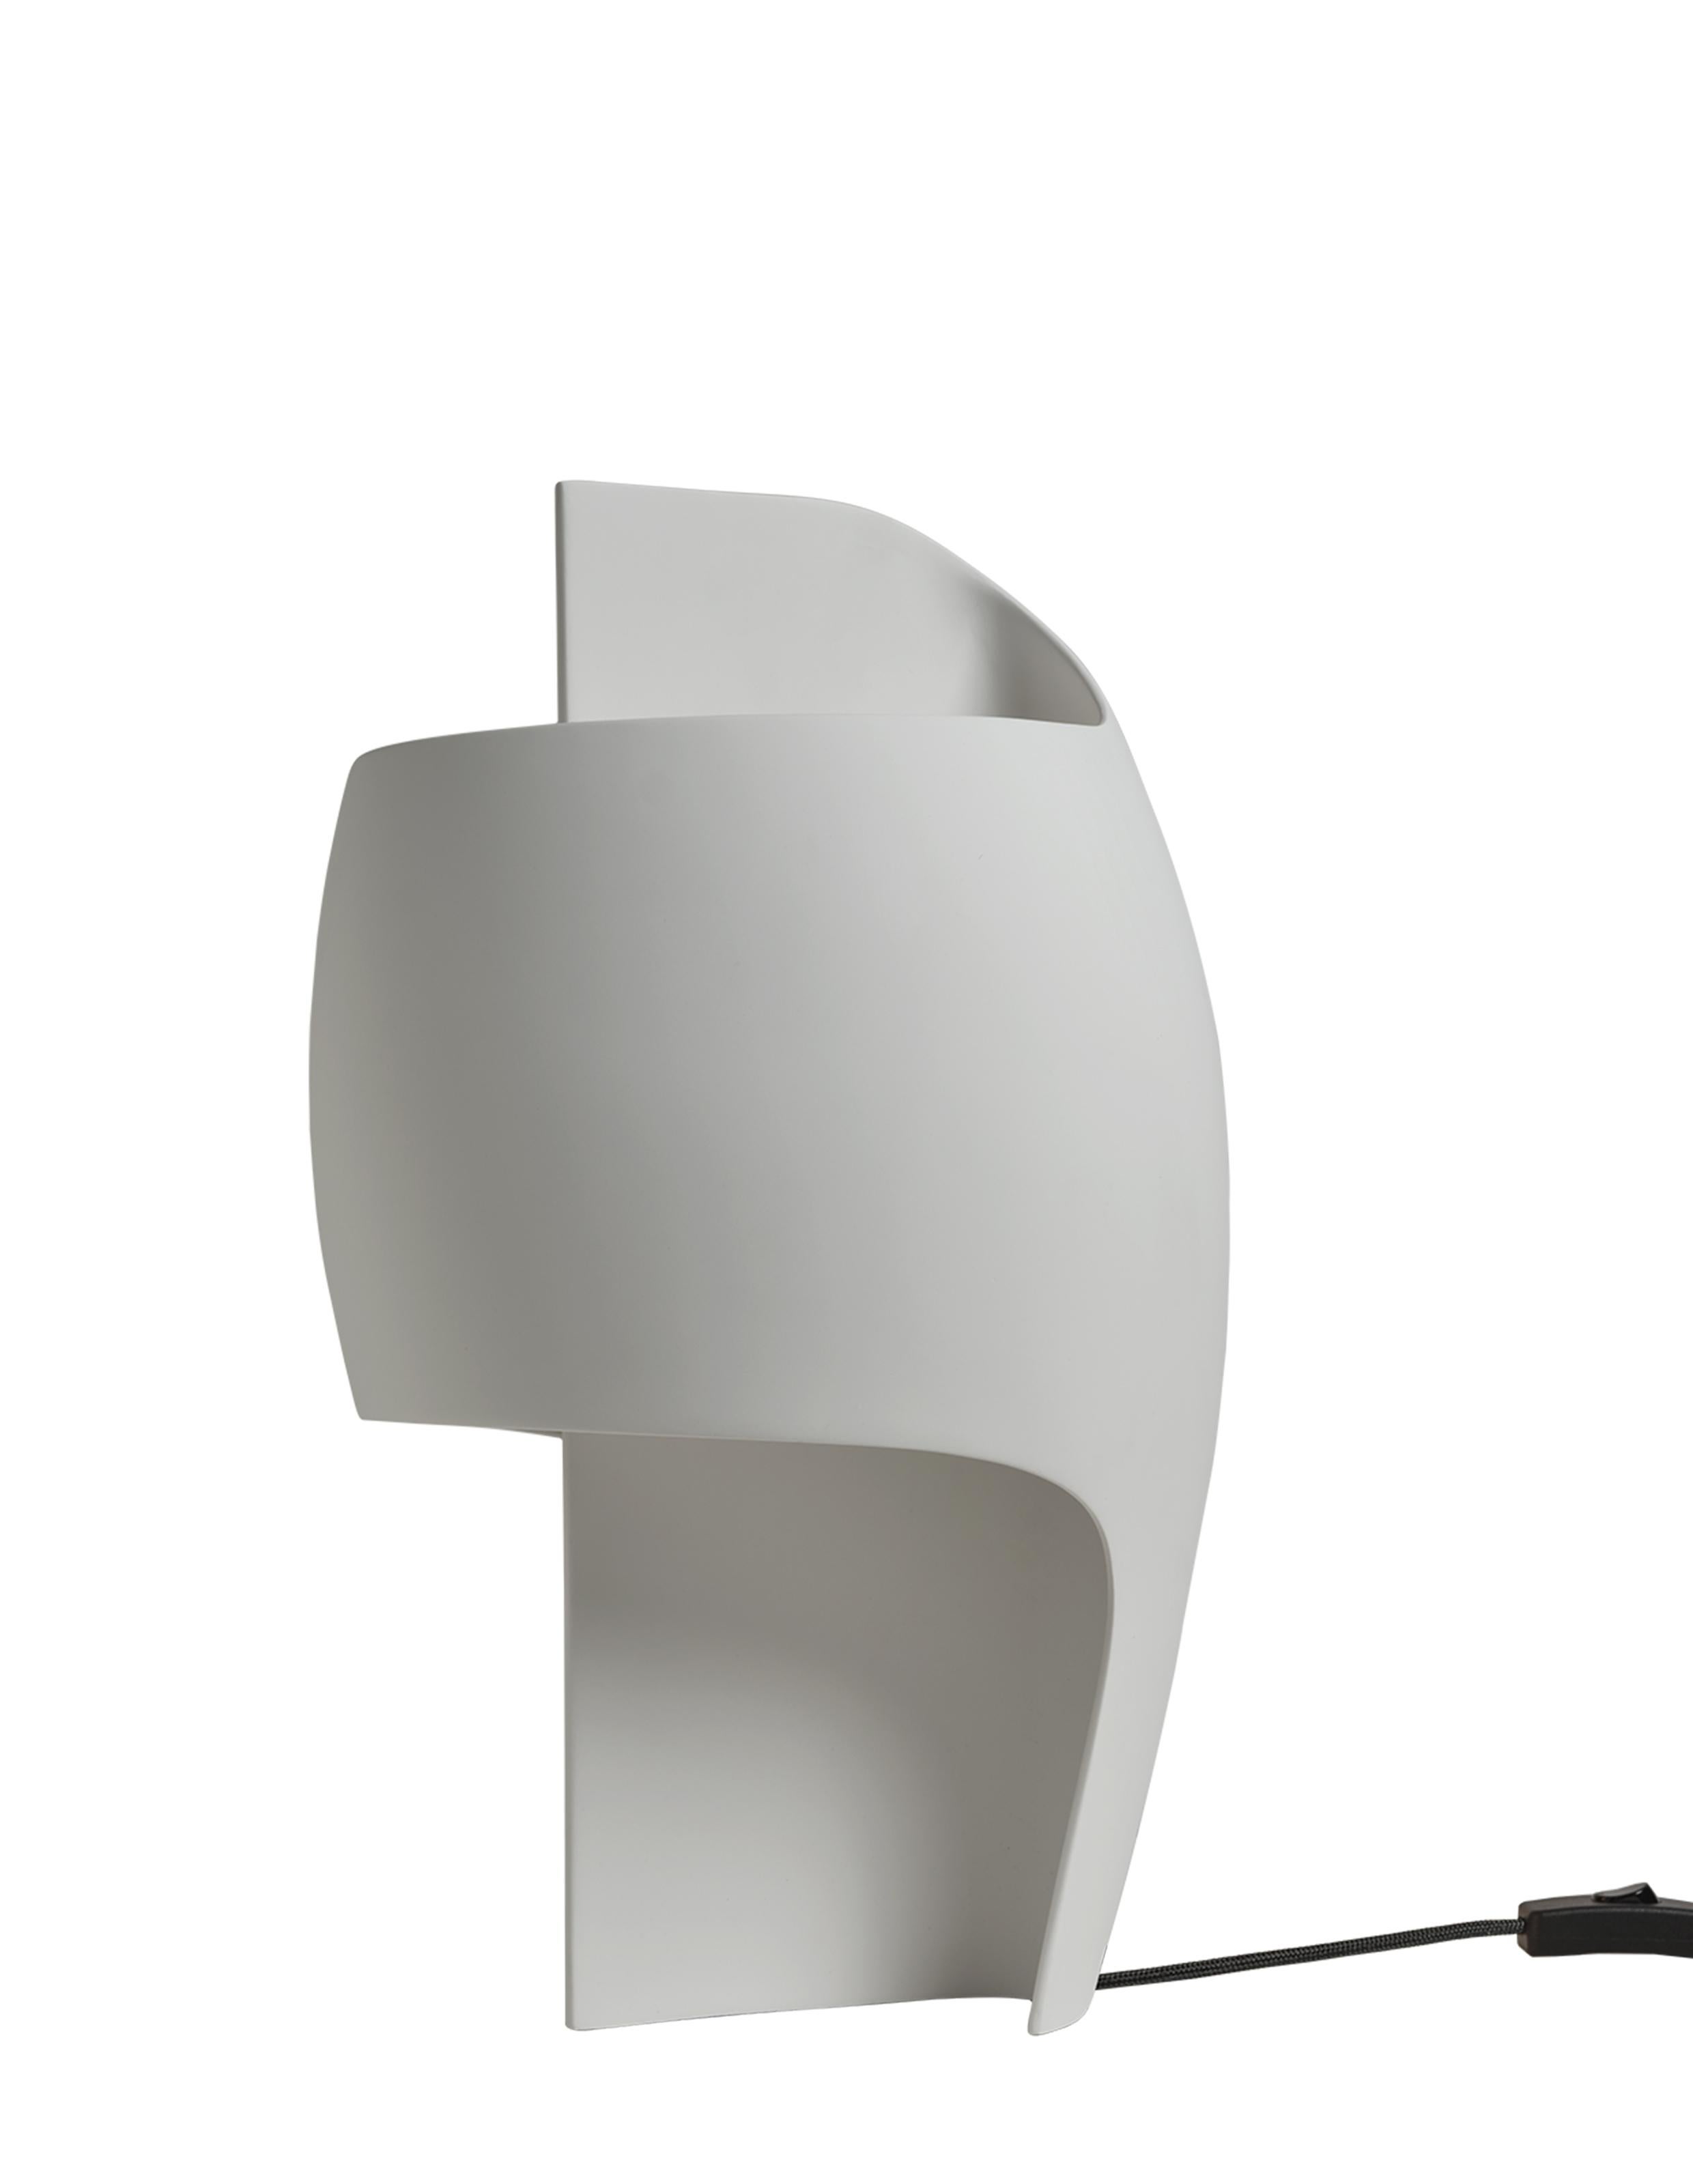 DCW Editions La Lampe B Table Lamp in White by Thierry Dreyfus
 
 Thierry Dreyfus has created a lamp designed to provide light, of course, but even more, to light up the intimate. And even better, to light up the night. Softly. Or the art of